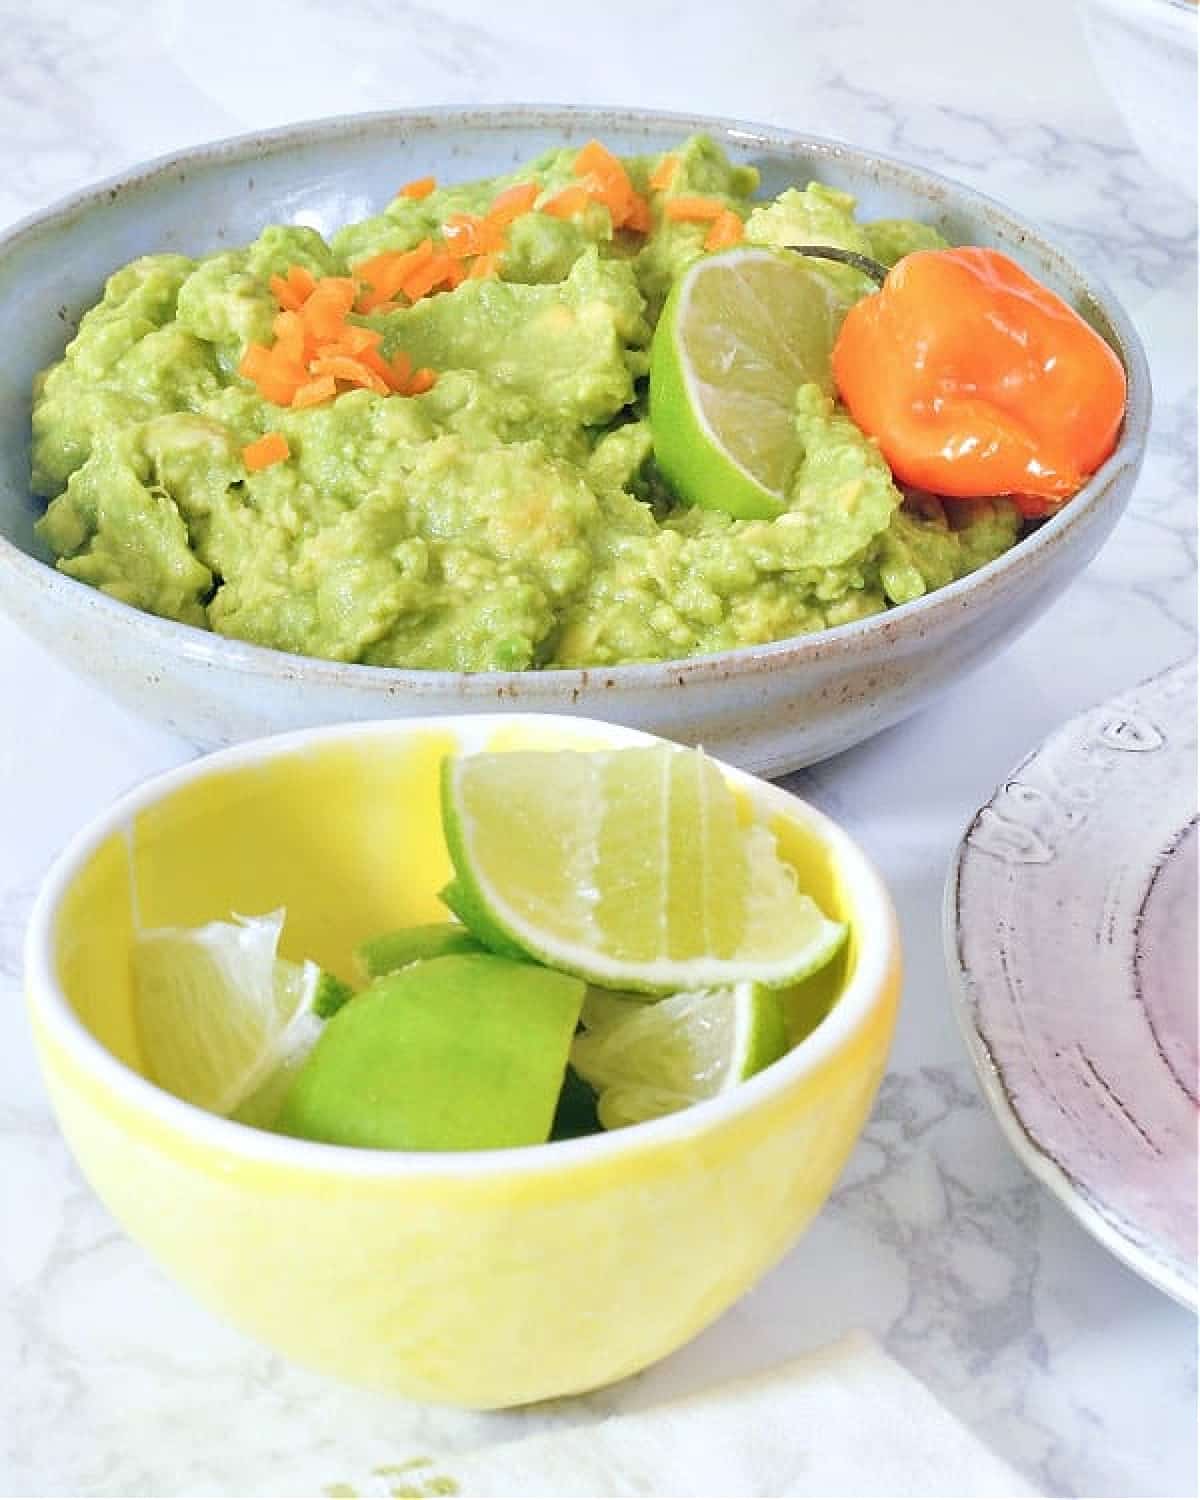 Mango habanero guacamole served in a shallow grey bowl. A smaller bowl of lime wedges on the side.